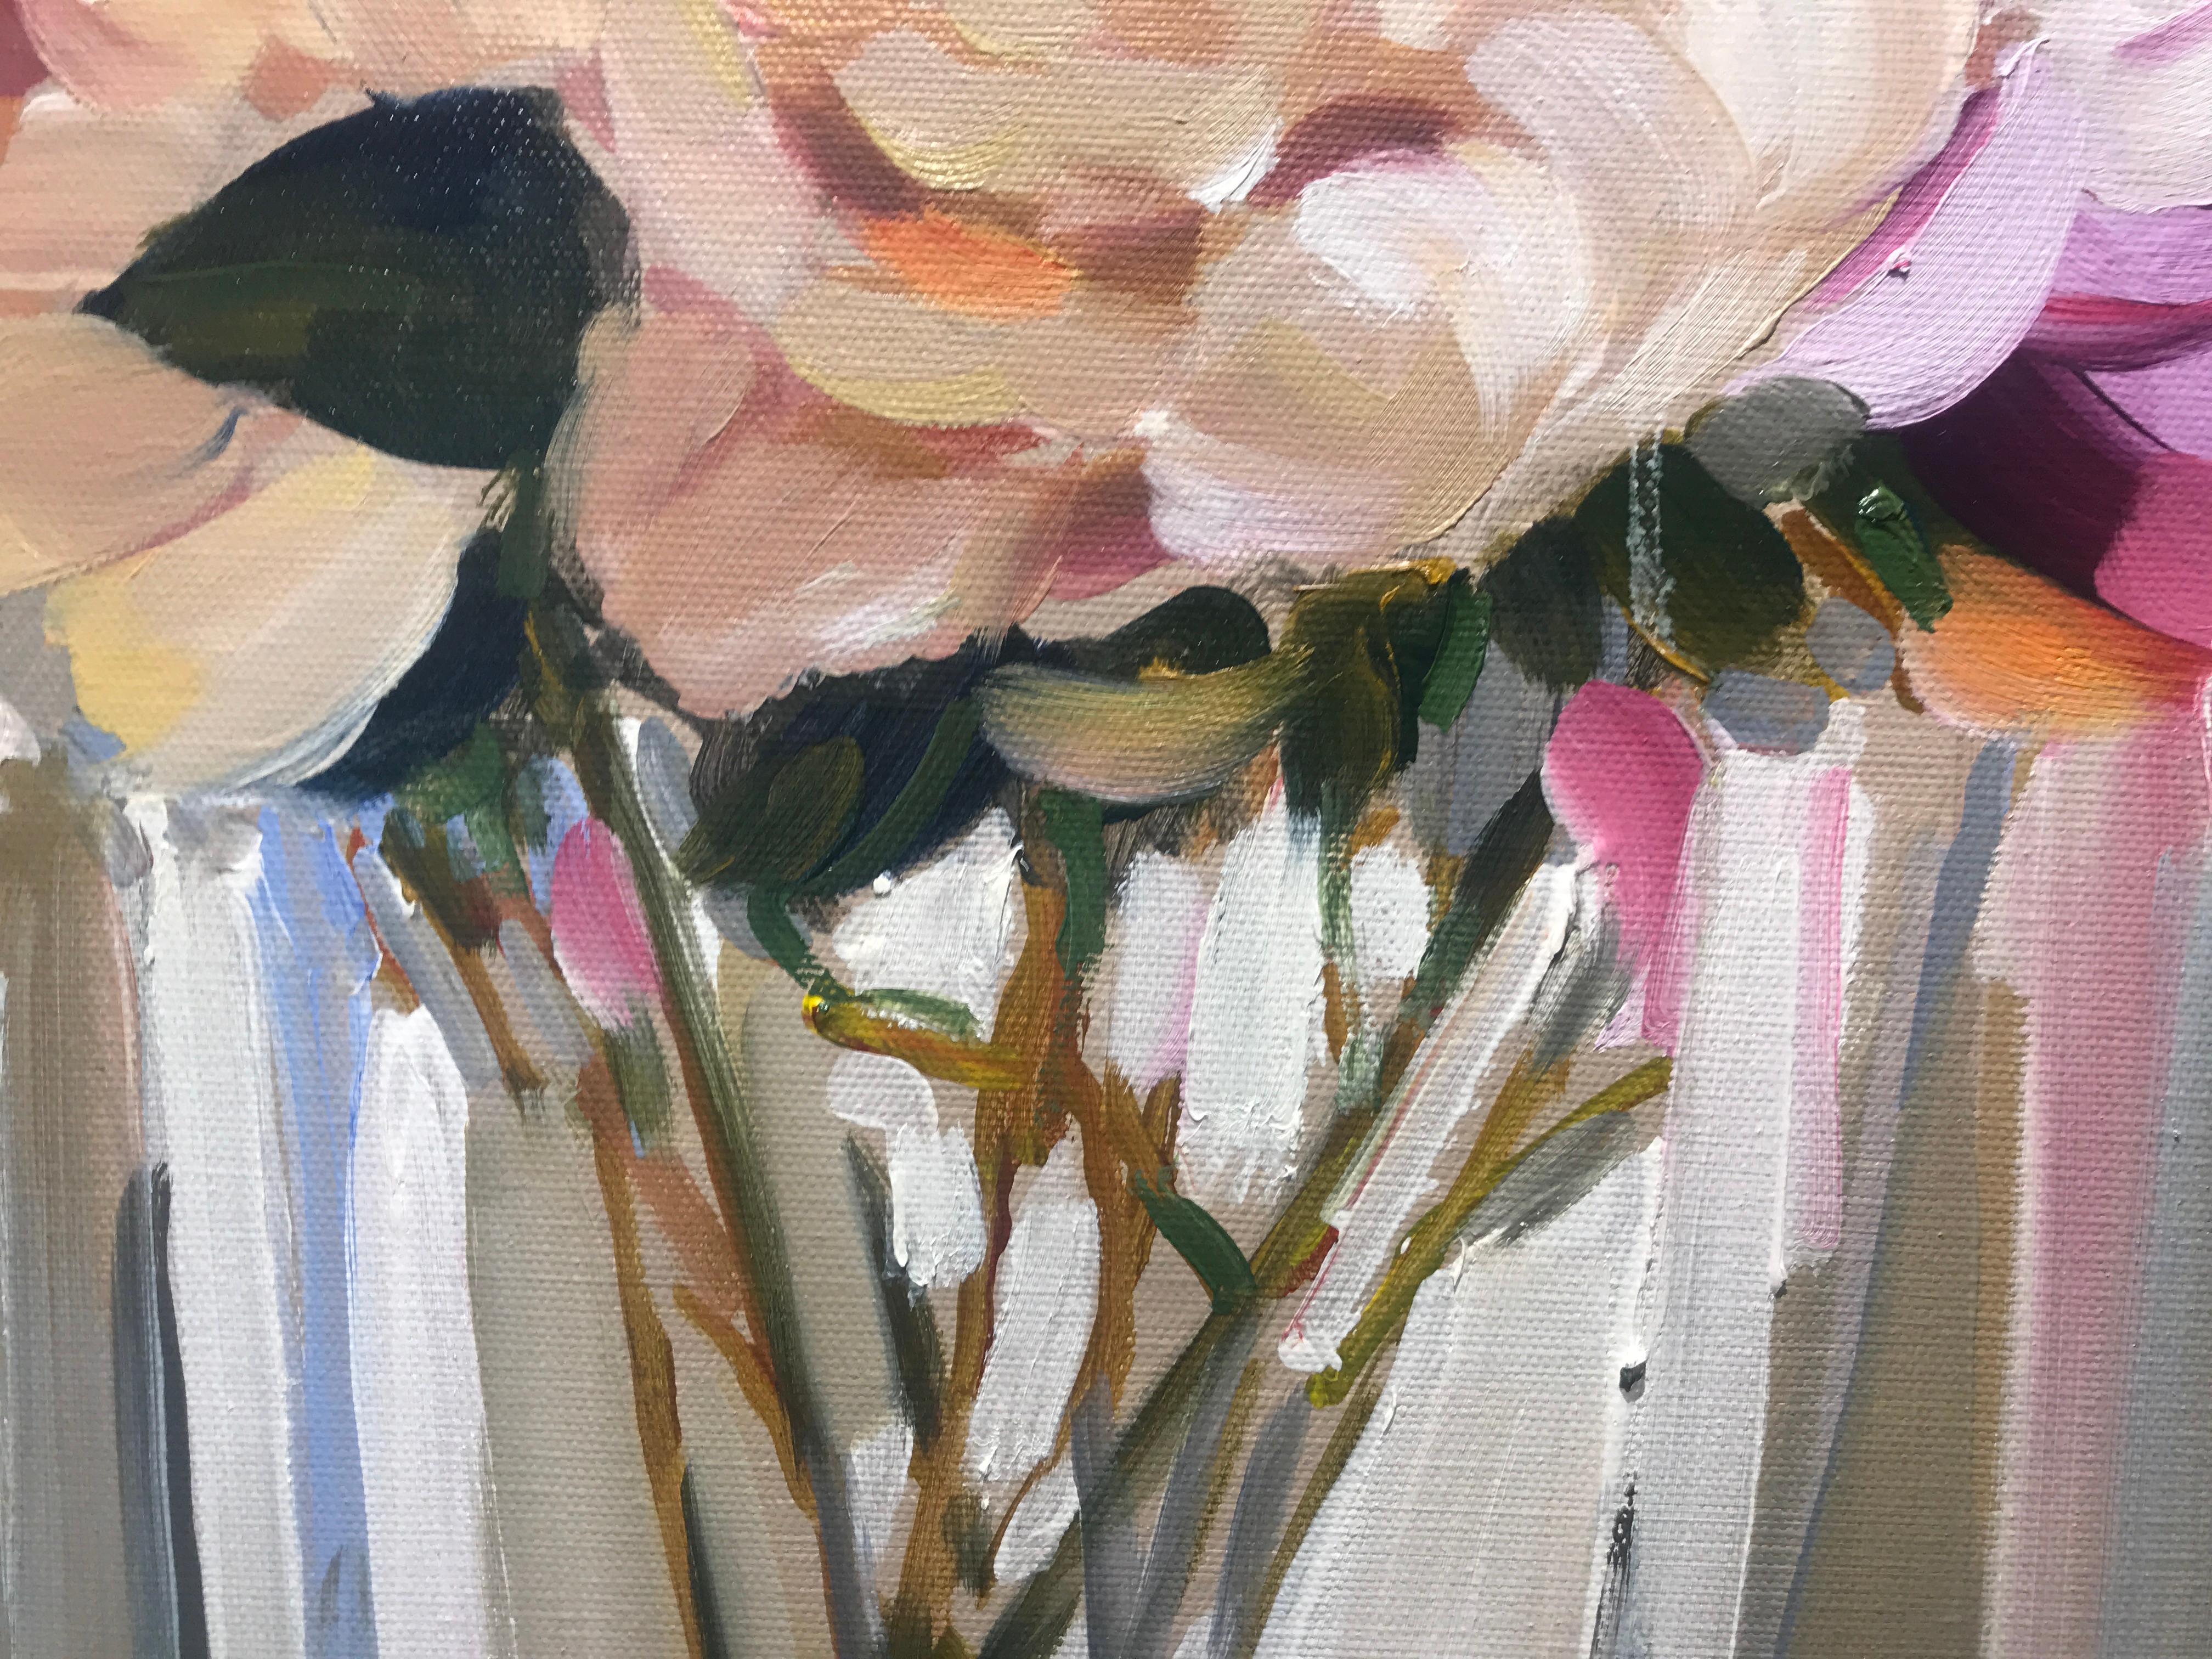 Peonies in a Glass Vase, Laura Shubert Impressionist Still-Life Floral Painting - Gray Still-Life Painting by Laura Lacambra Shubert